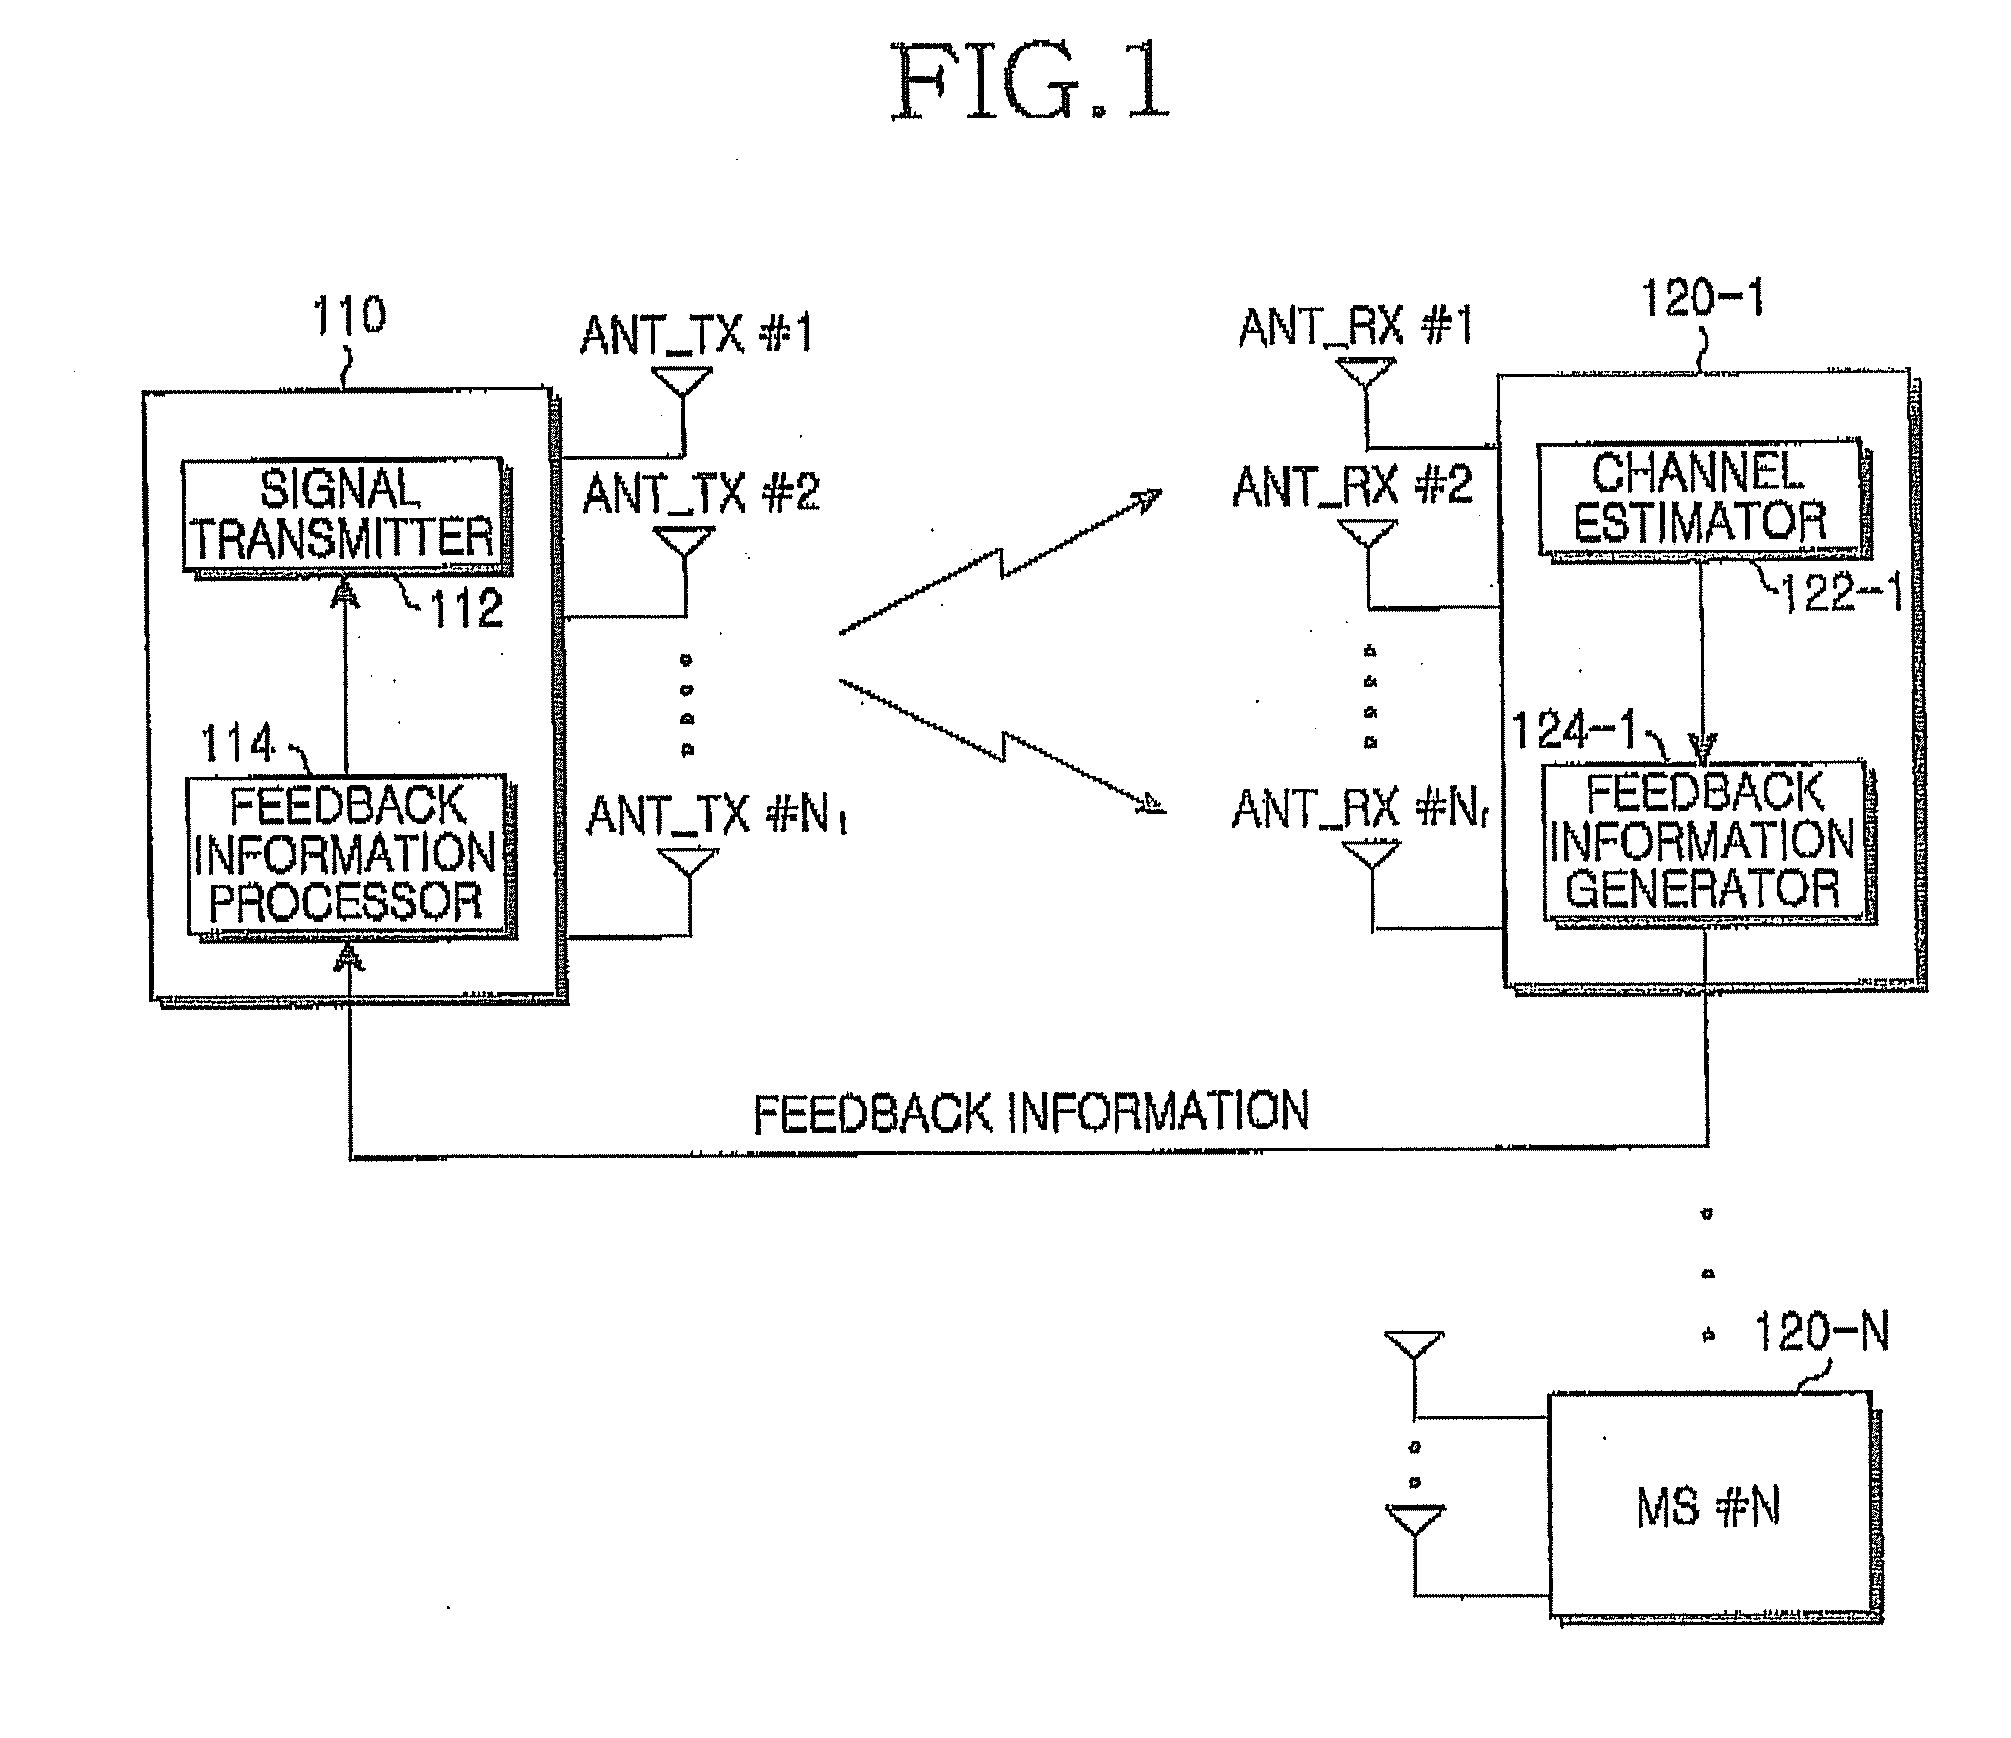 Apparatus and method for transmitting/receiving data in a closed-loop multi-antenna system